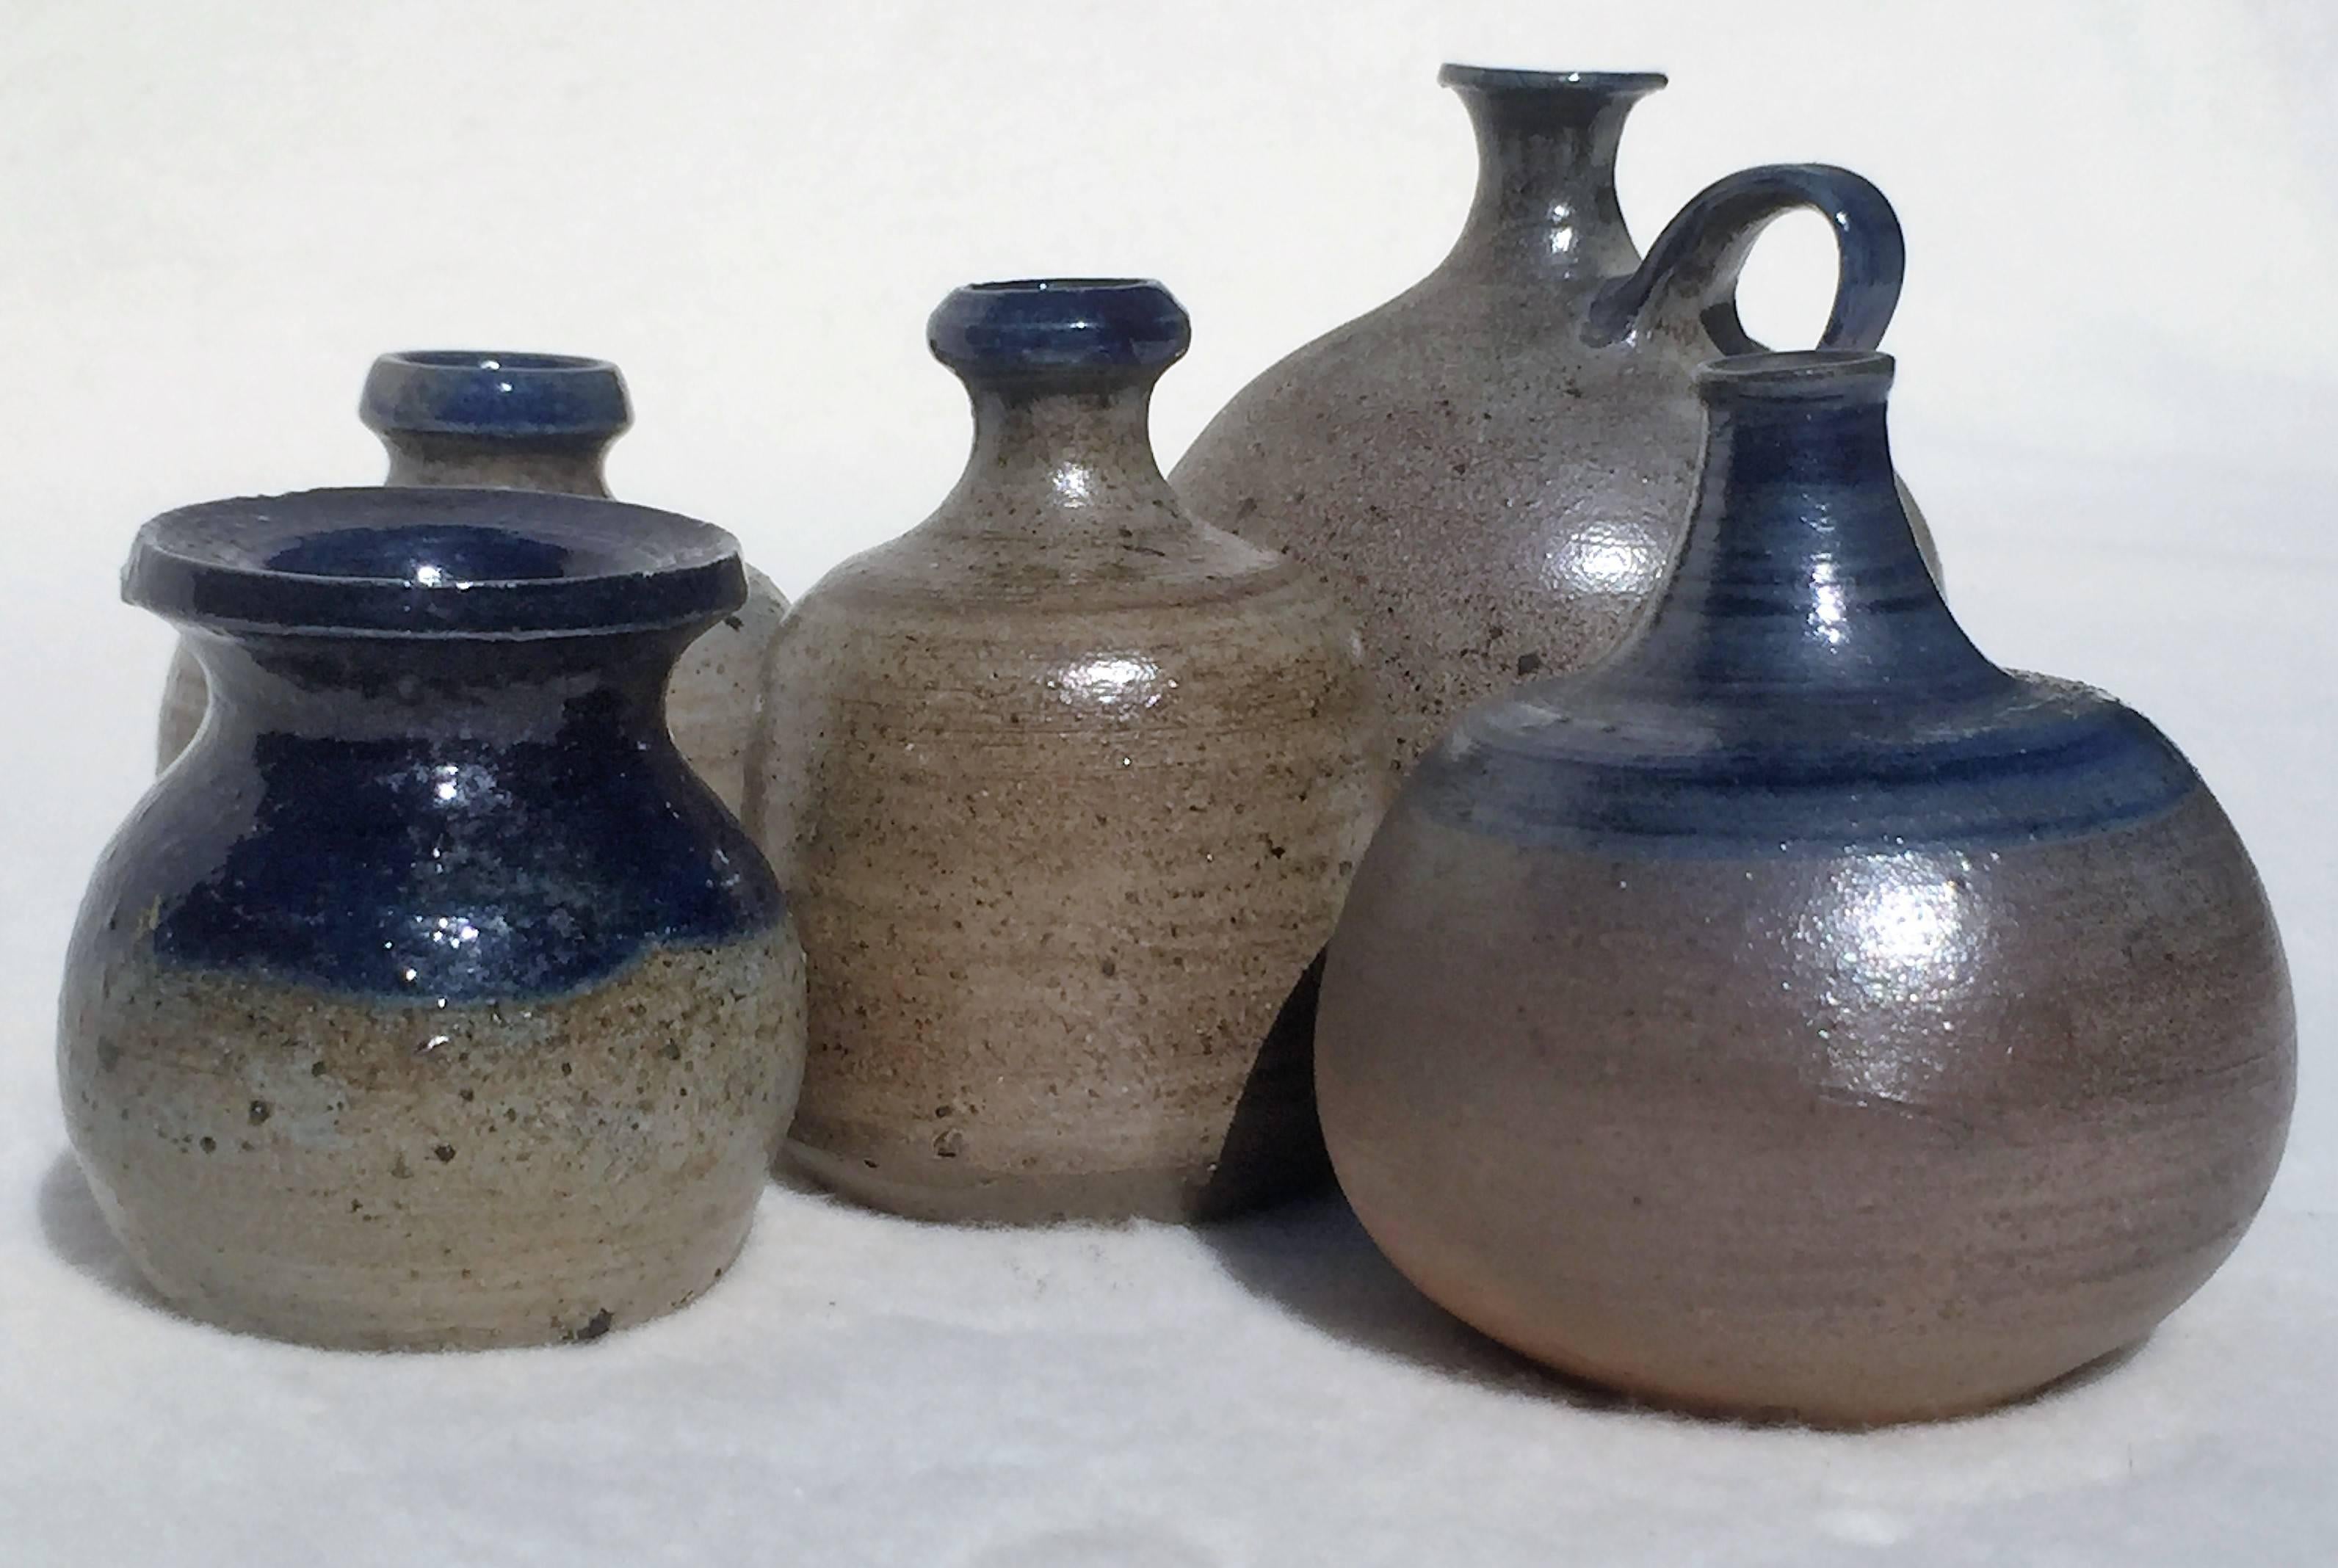 A set of five unique turned ceramical miniature vases, grey and blue salt glaze with a mother-of-pearl shimmer. By Lilo Grinzoff-Assenmacher, Germany, 1960s. Salt glazed ceramics is an extremely hard material, burned at very high temperatures.
The